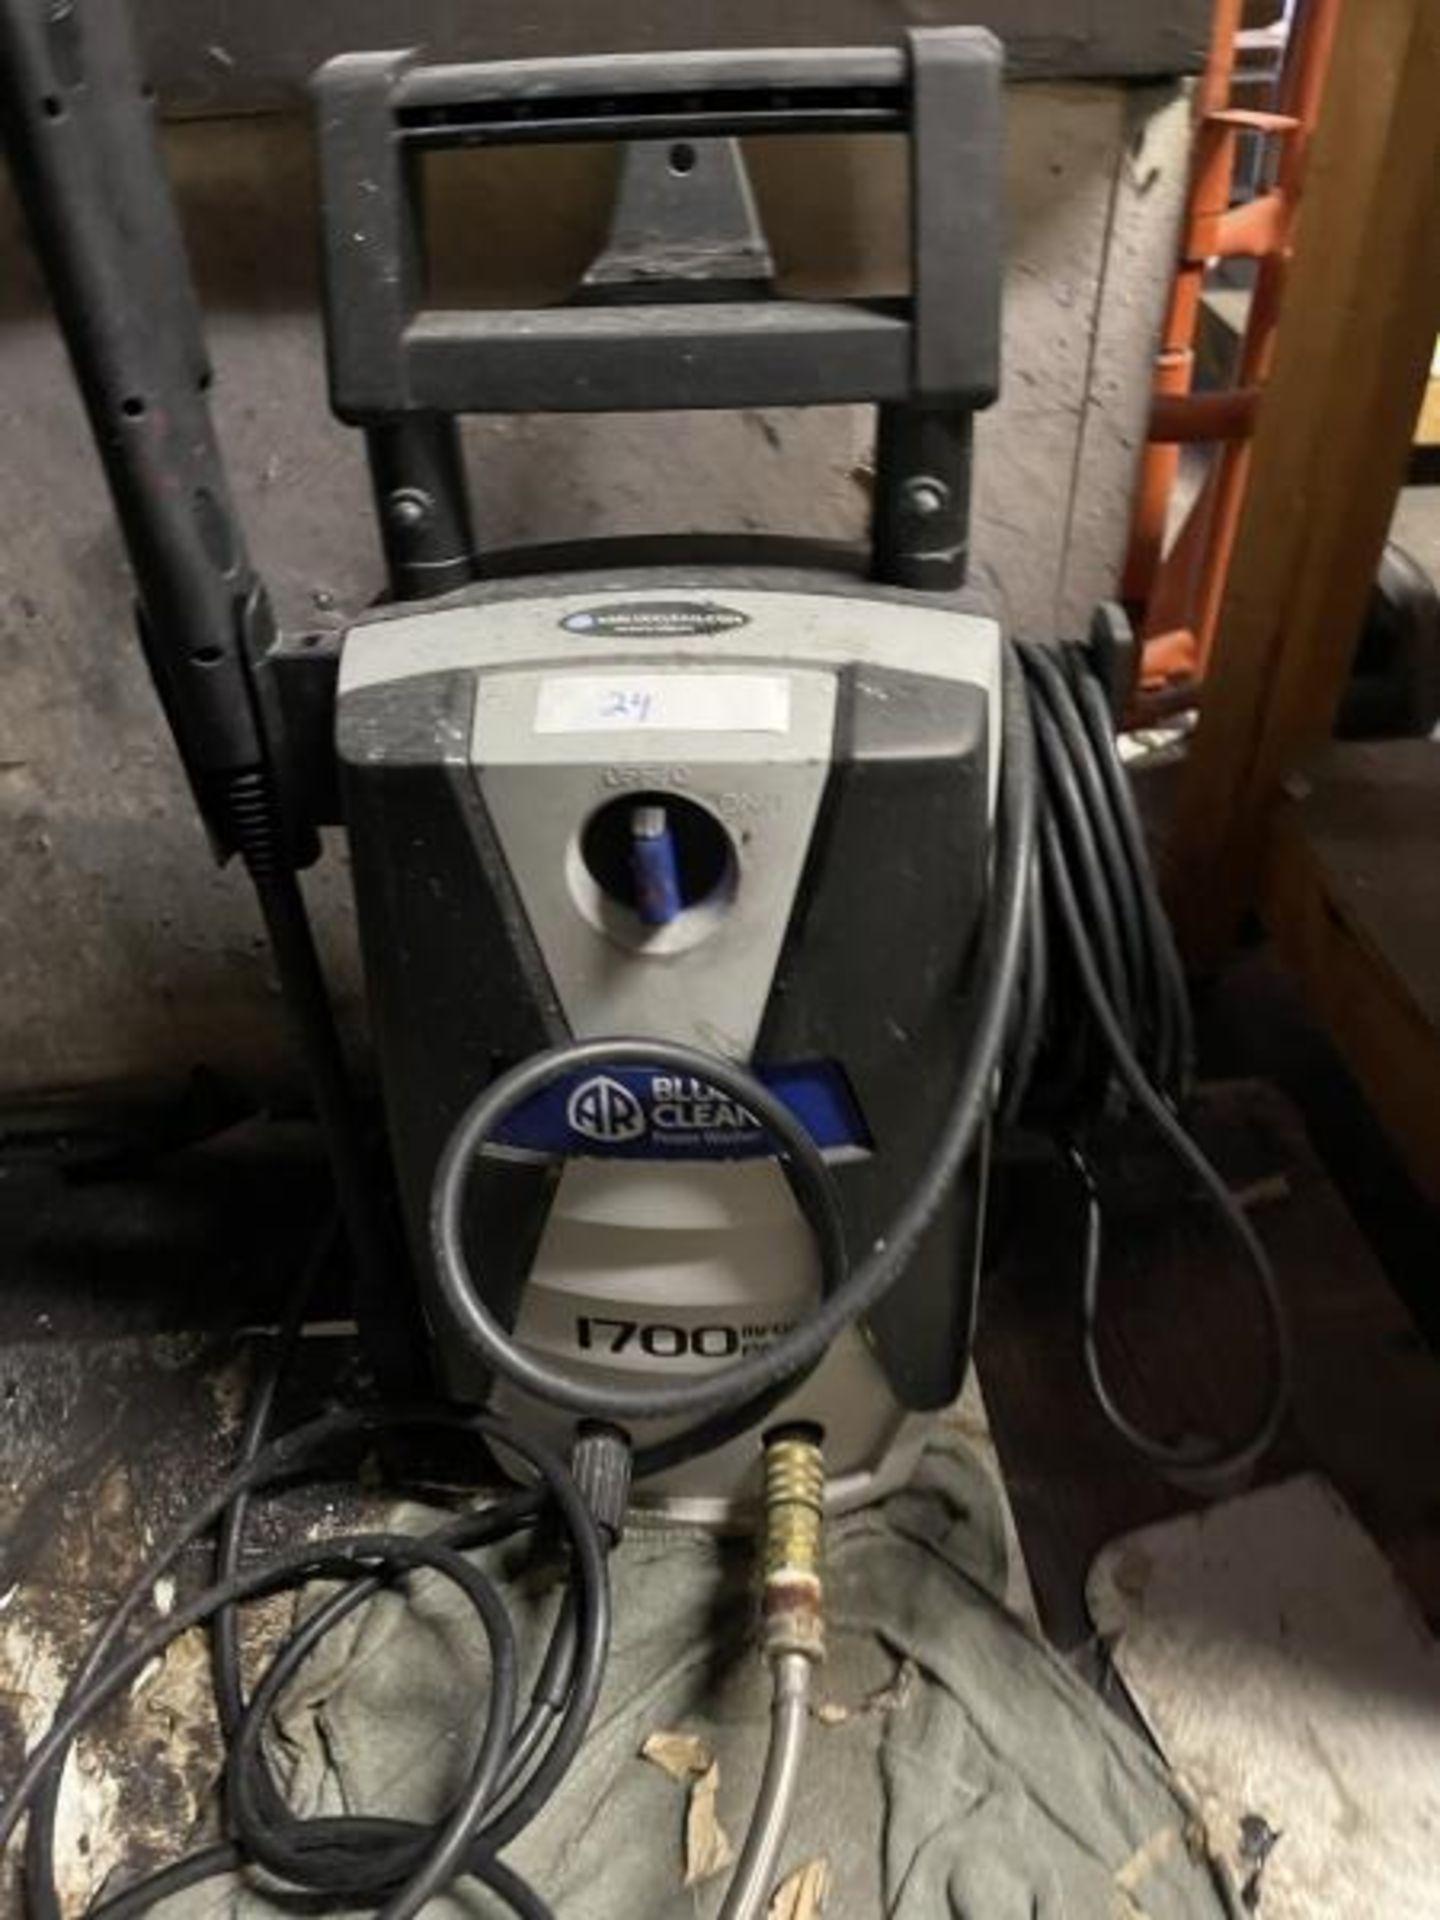 Power Washer, Electric by Blue Clean, 1700 PSI